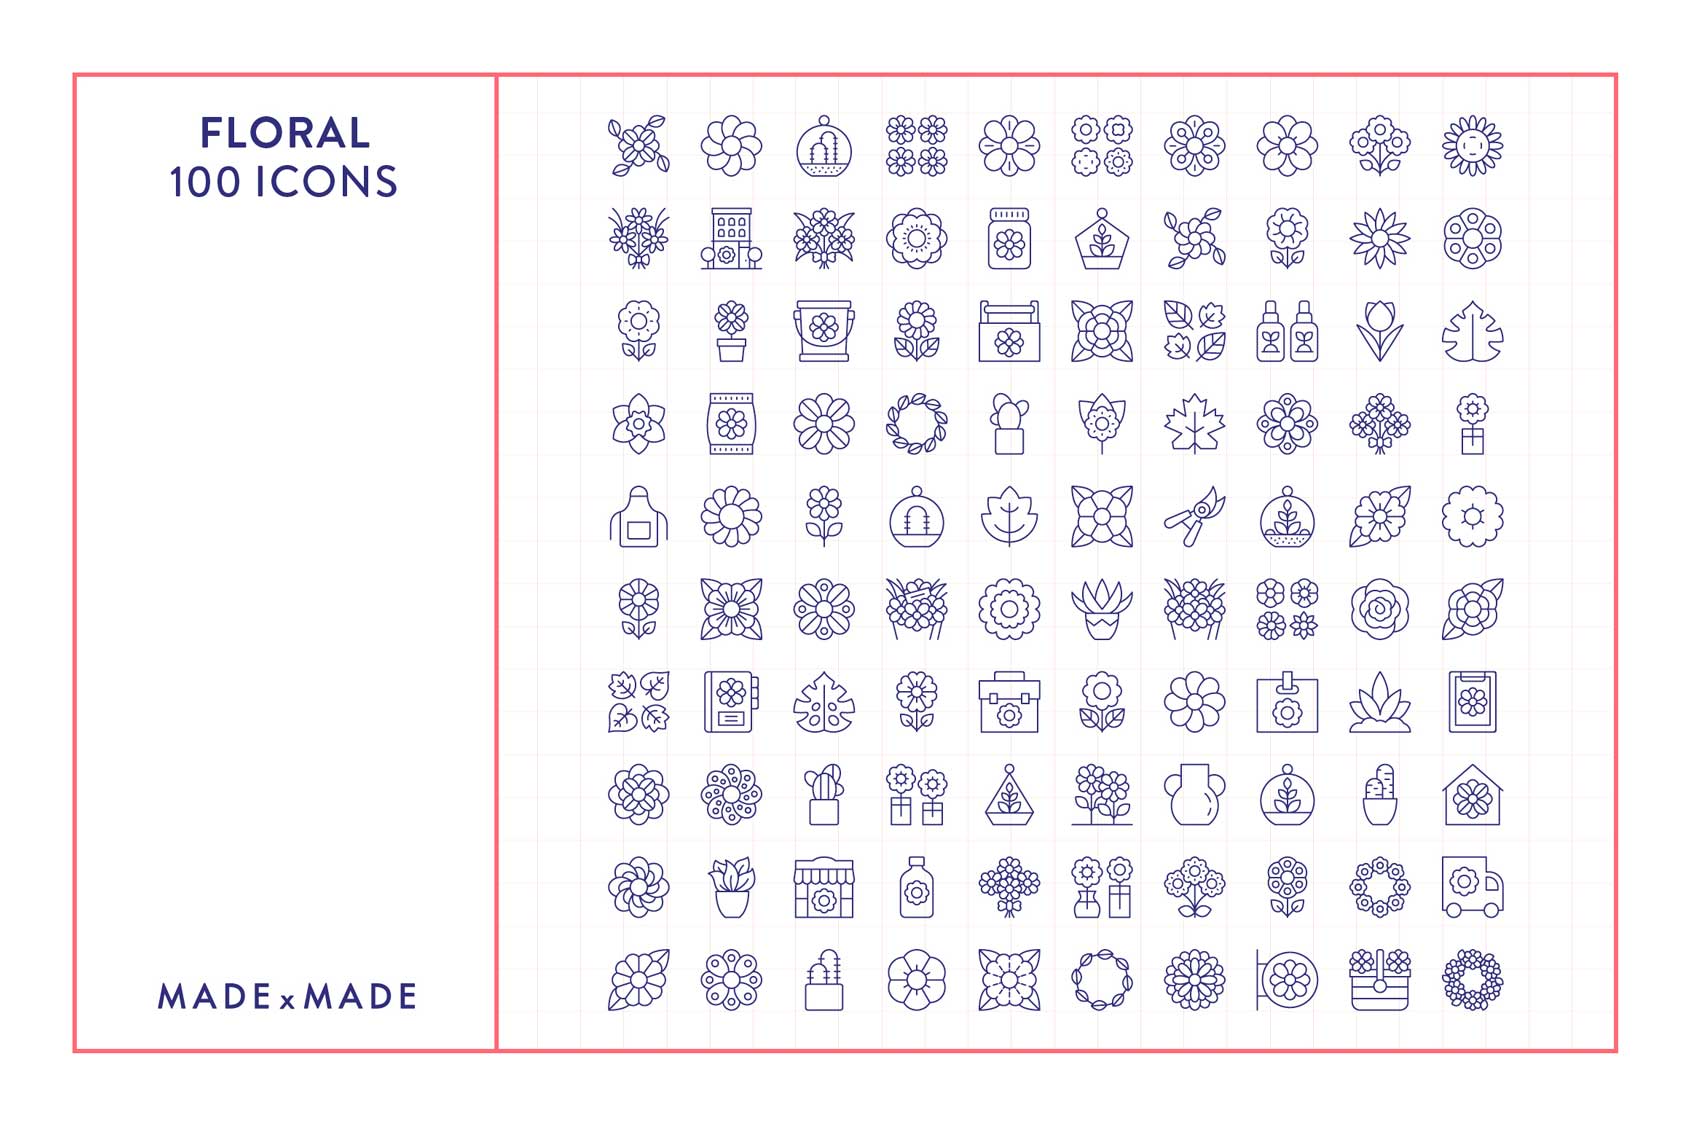 made x made icons floral